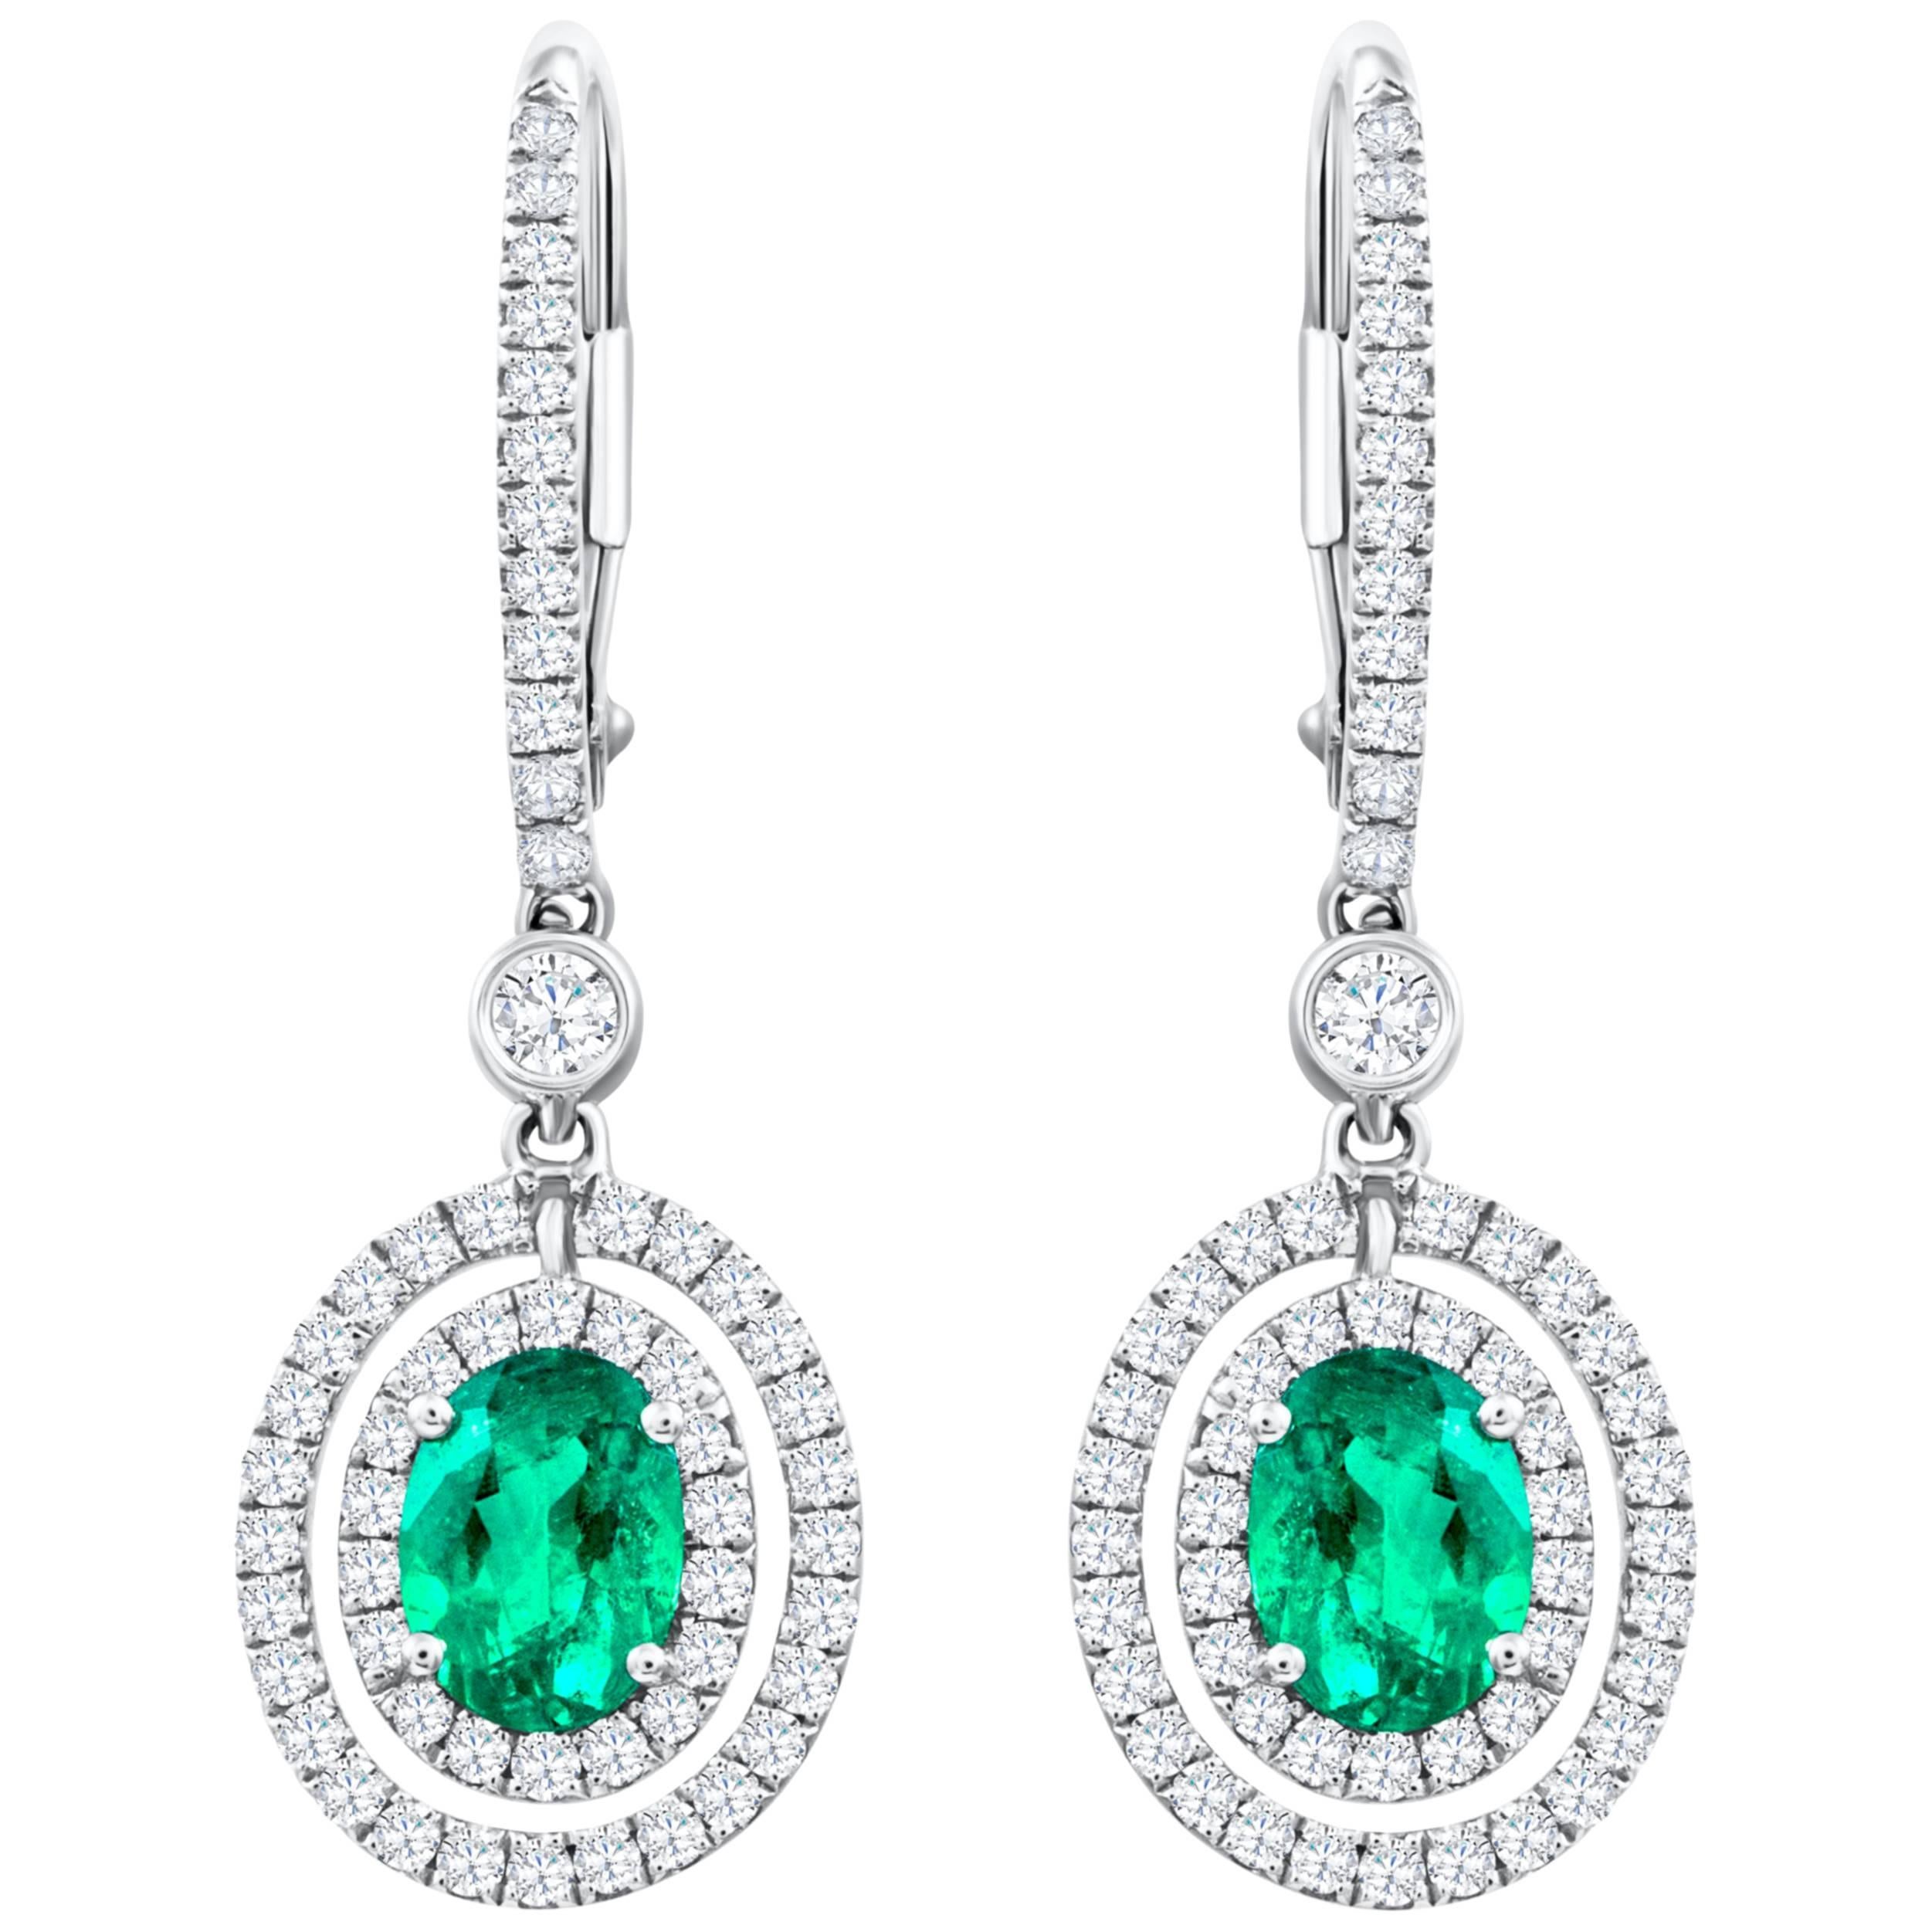 1.01 Carats Total Oval Cut Emerald and Diamond Halo Dangle Earrings For Sale